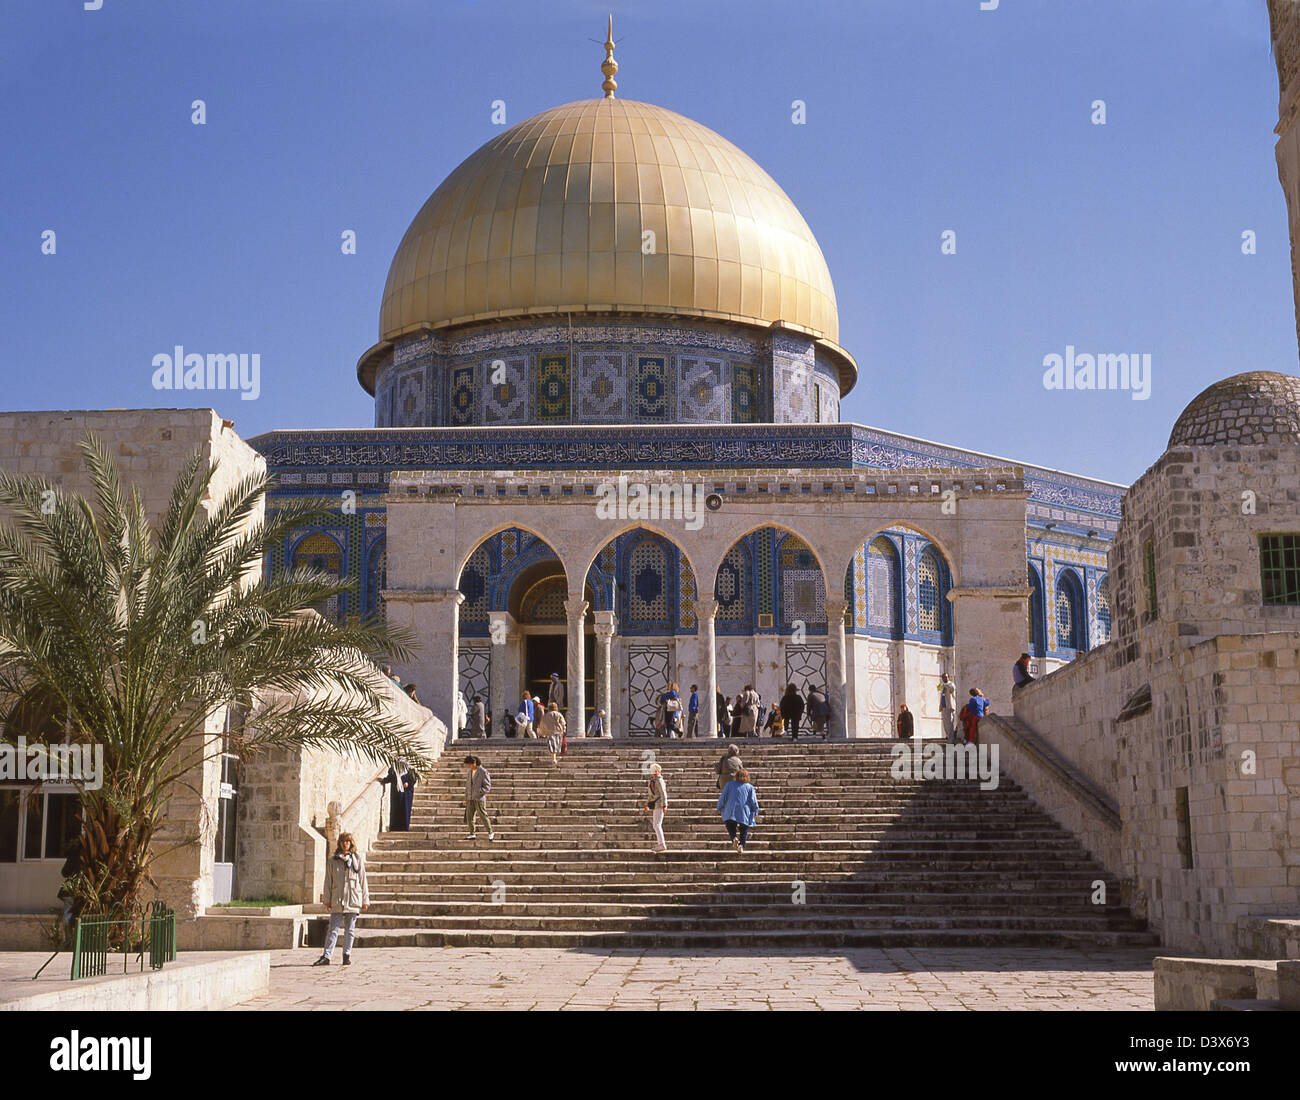 The Dome of the Rock (Qubbat as-Sakhra) on Temple Mount, Old City, Jerusalem, Israel Stock Photo